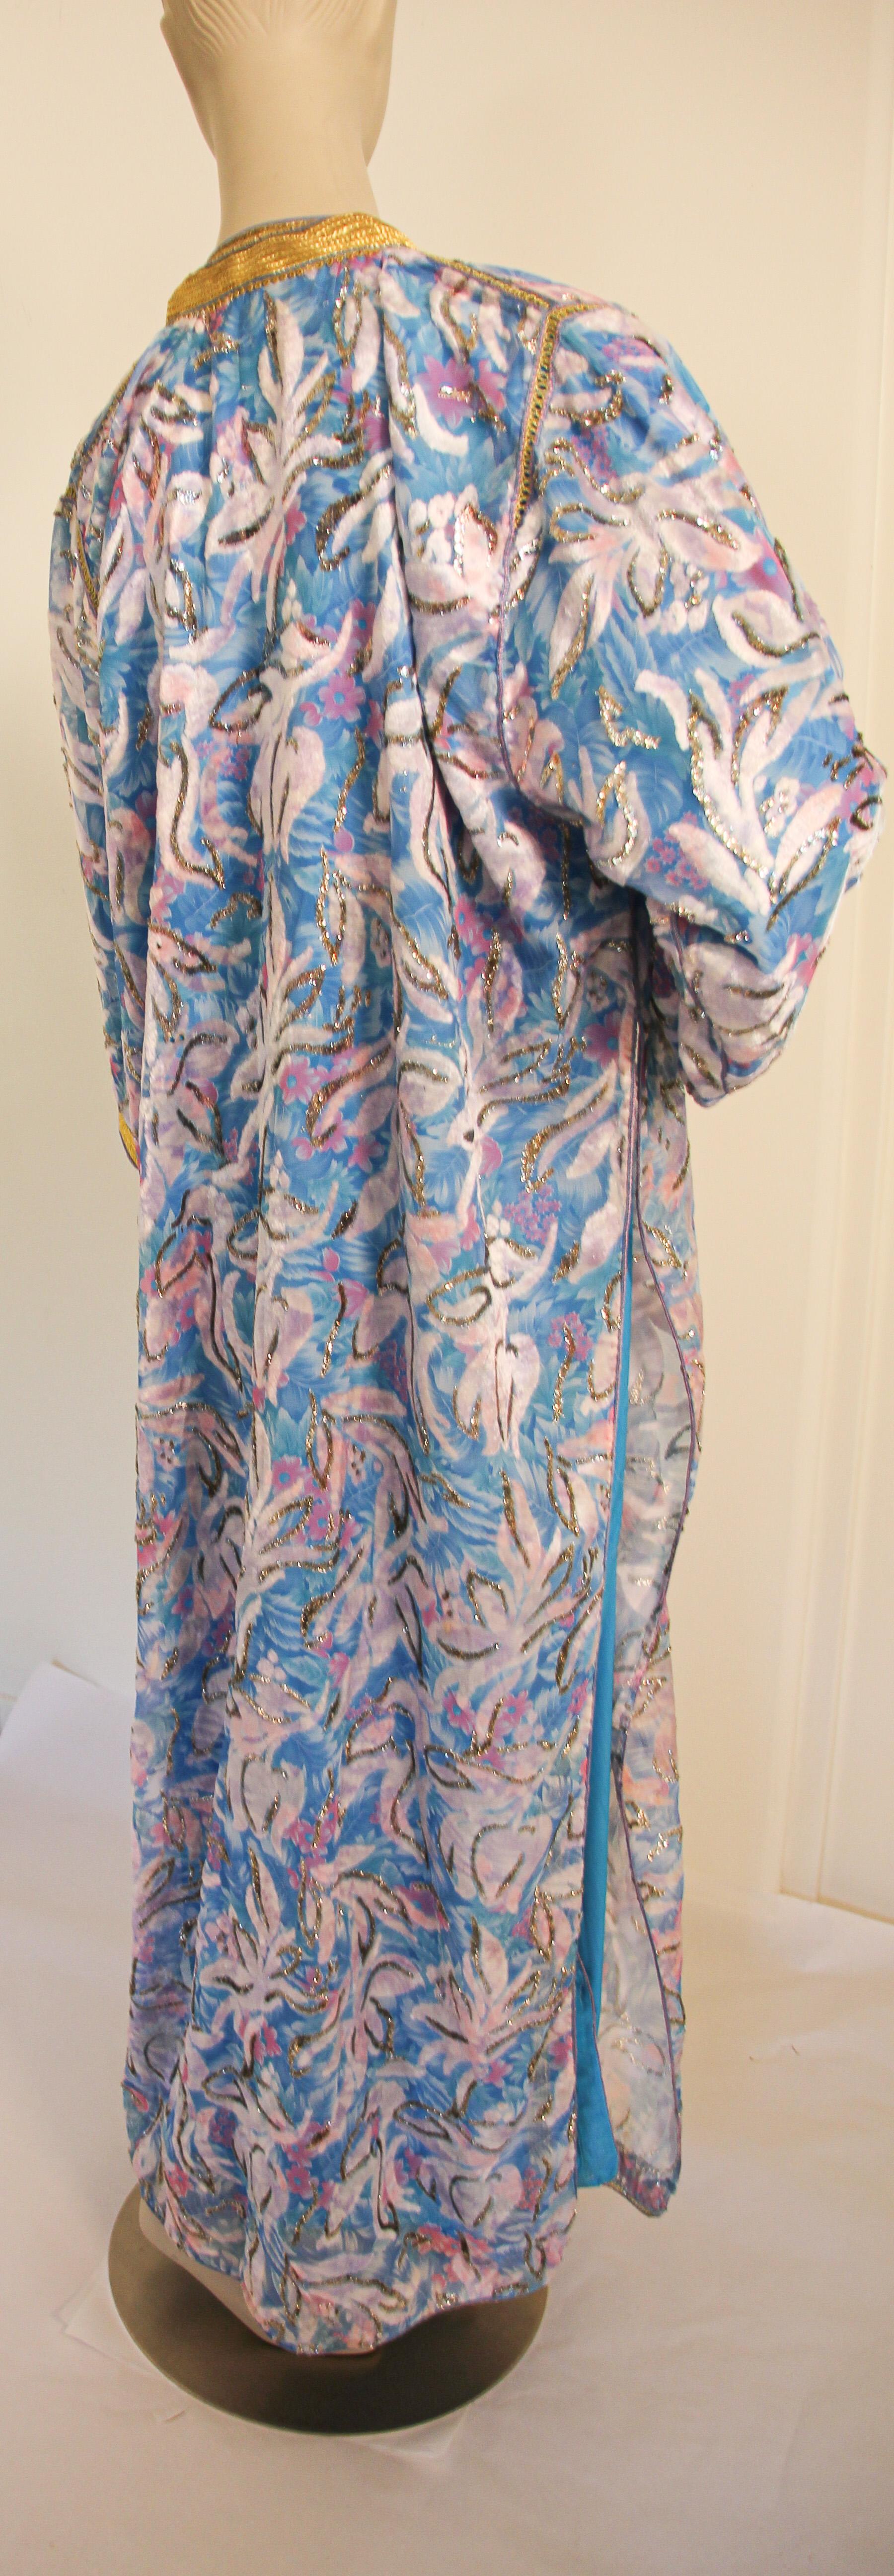 Moroccan Kaftan in Turquoise and Gold Floral Brocade Metallic Lame For Sale 3